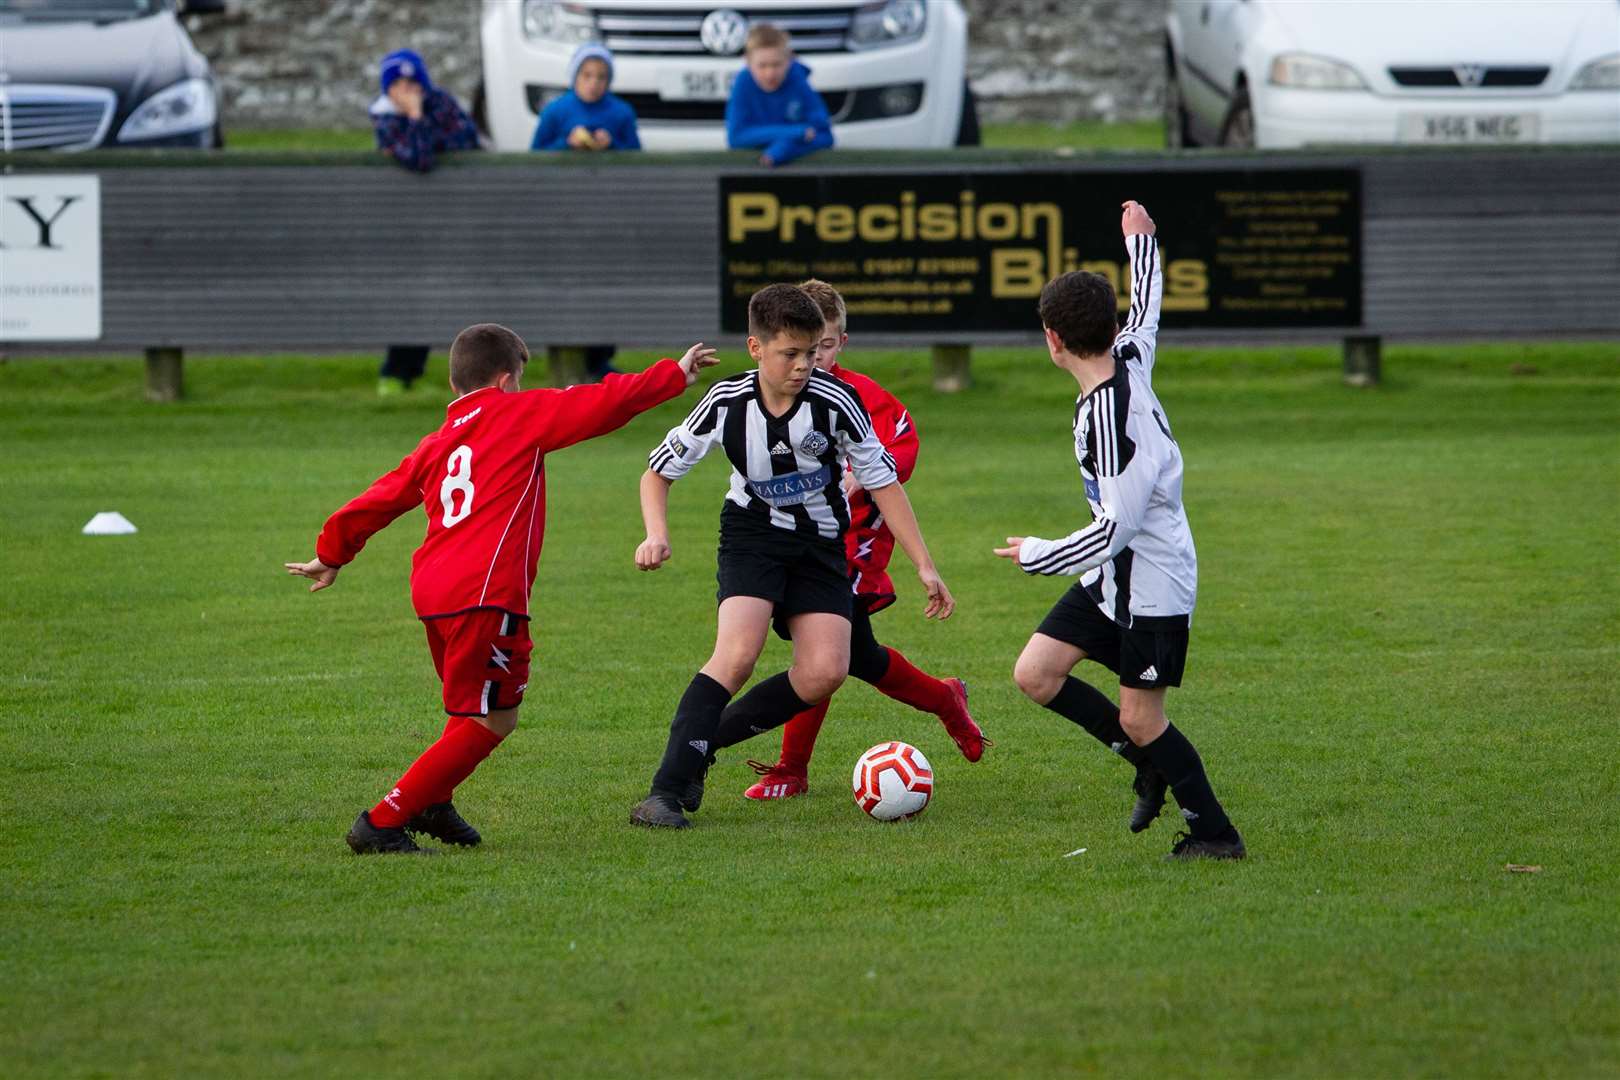 Owen Bain stepping inside two defenders with Sam Shearer watching on. Picture: Gareth Watkins